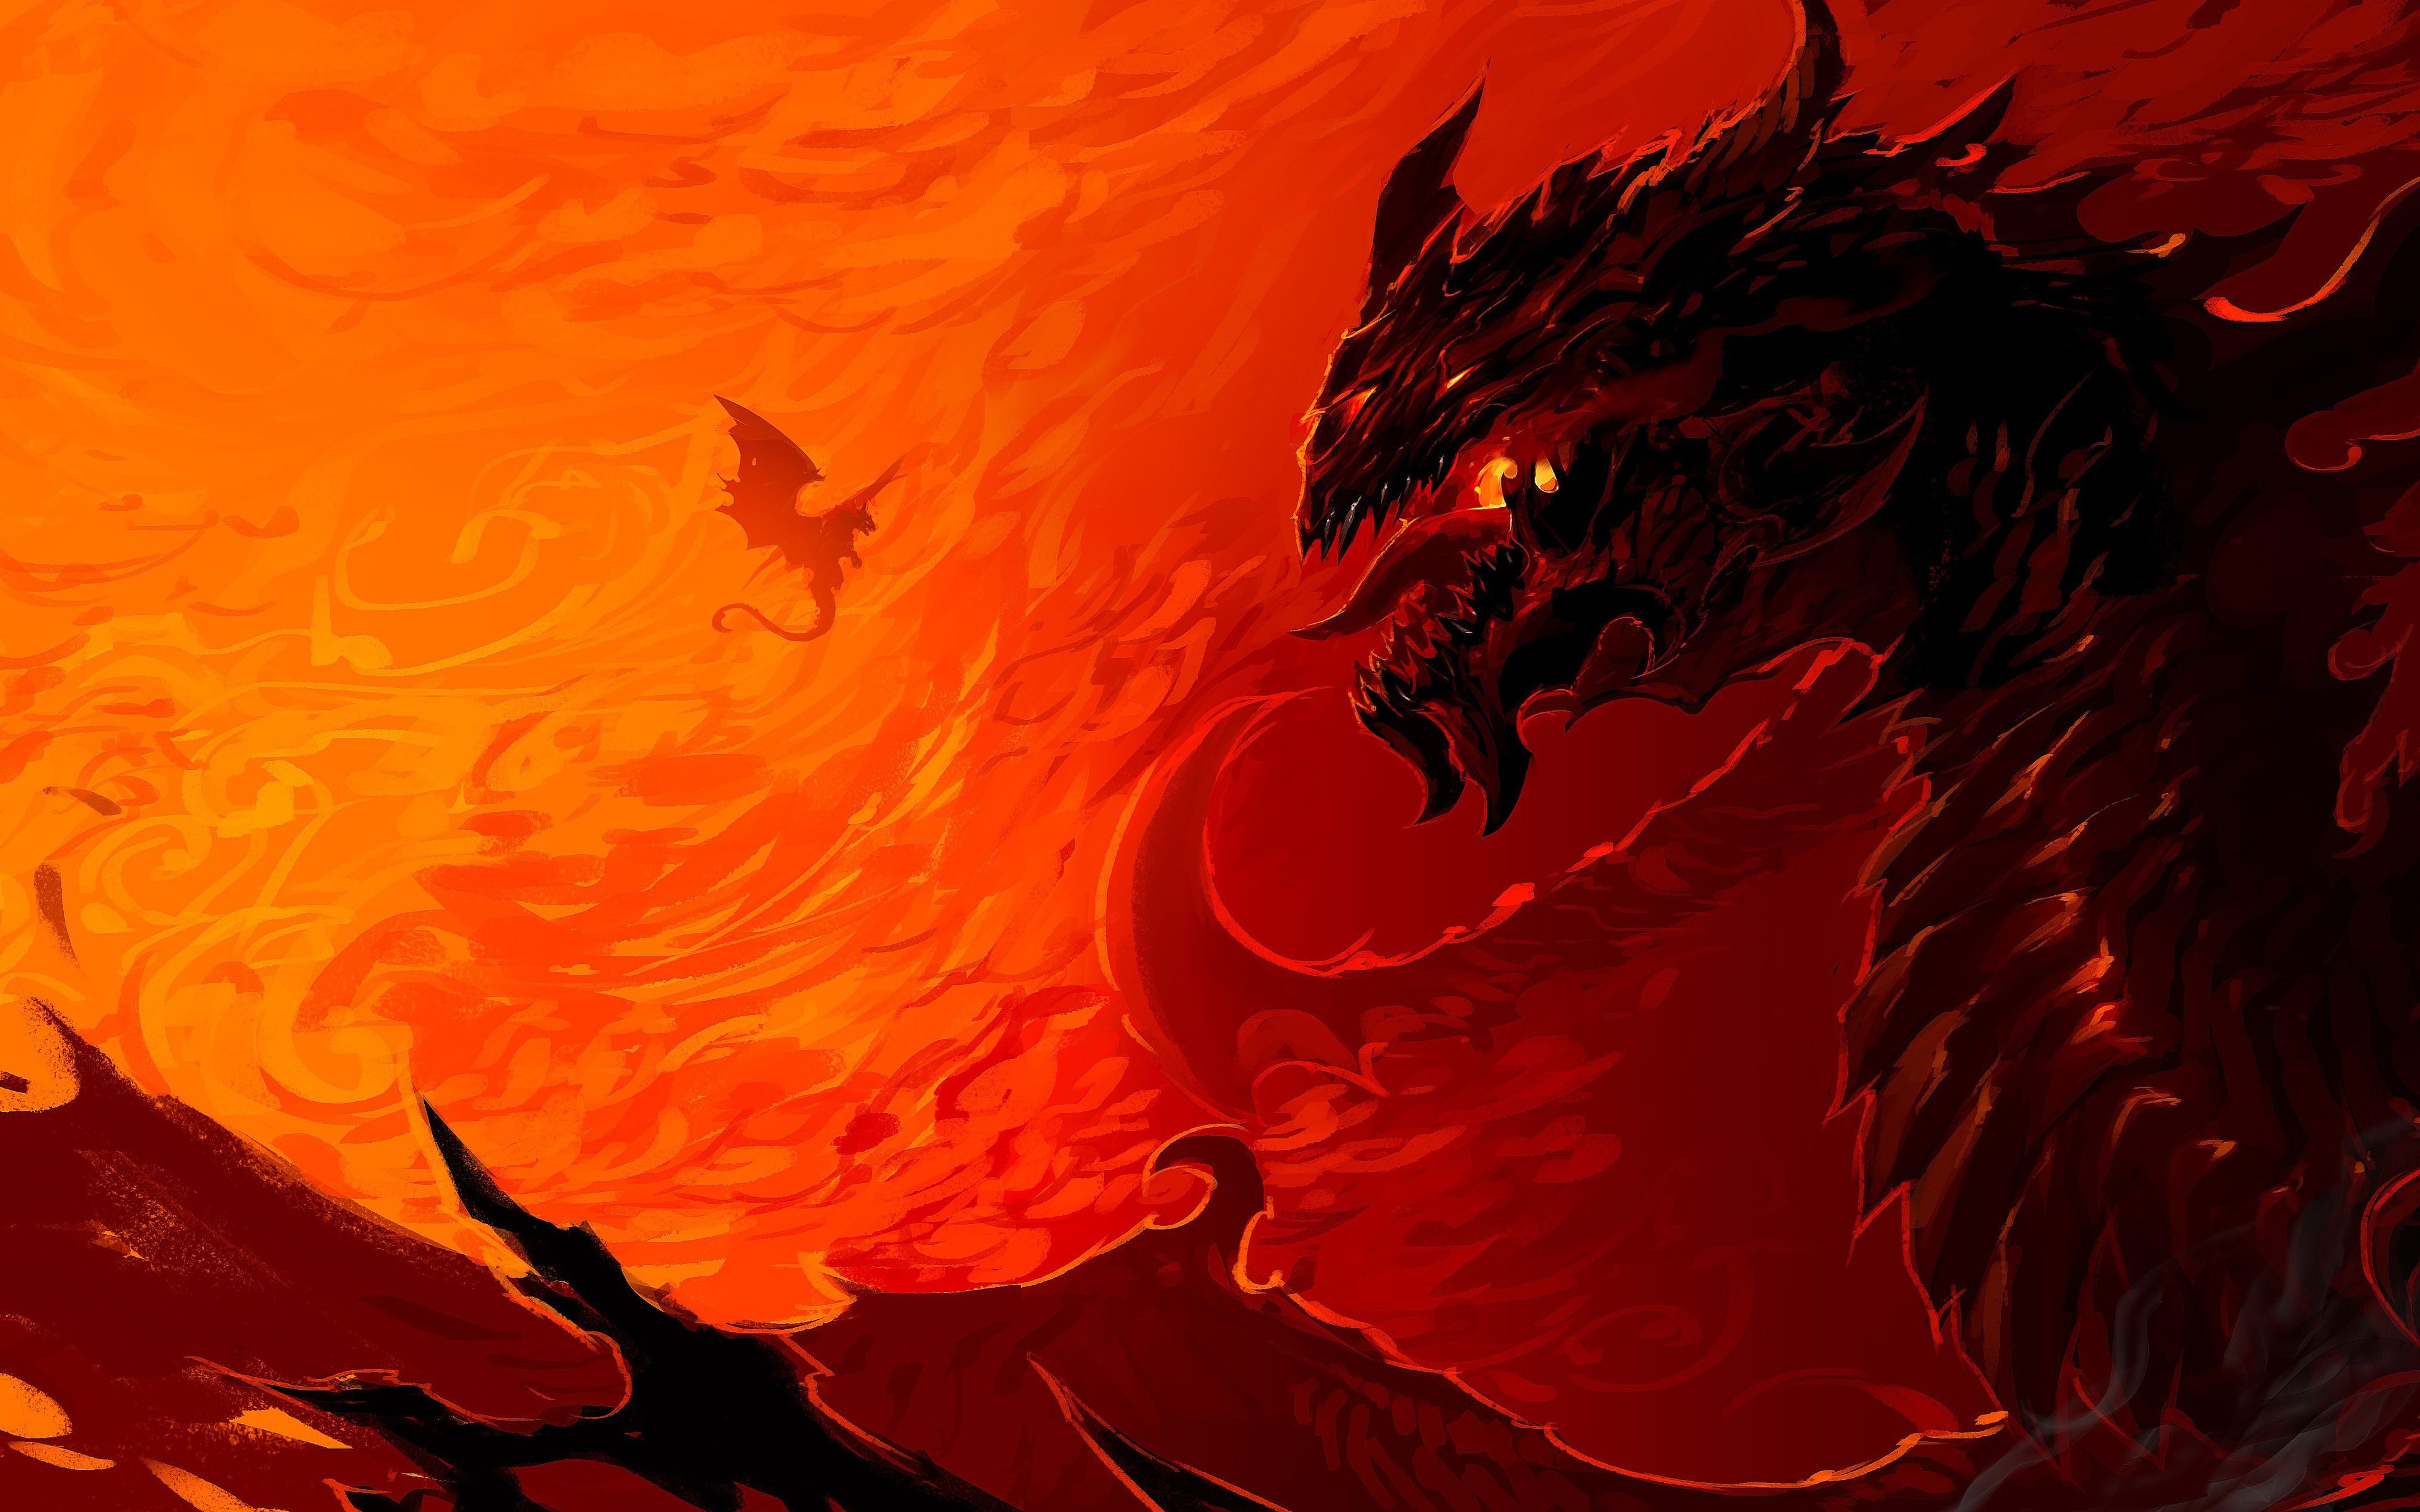 Download wallpaper 4k, dragon, art, monster, fire flames, cliffs, fire, dragons for desktop with resolution 3840x2400. High Quality HD picture wallpaper